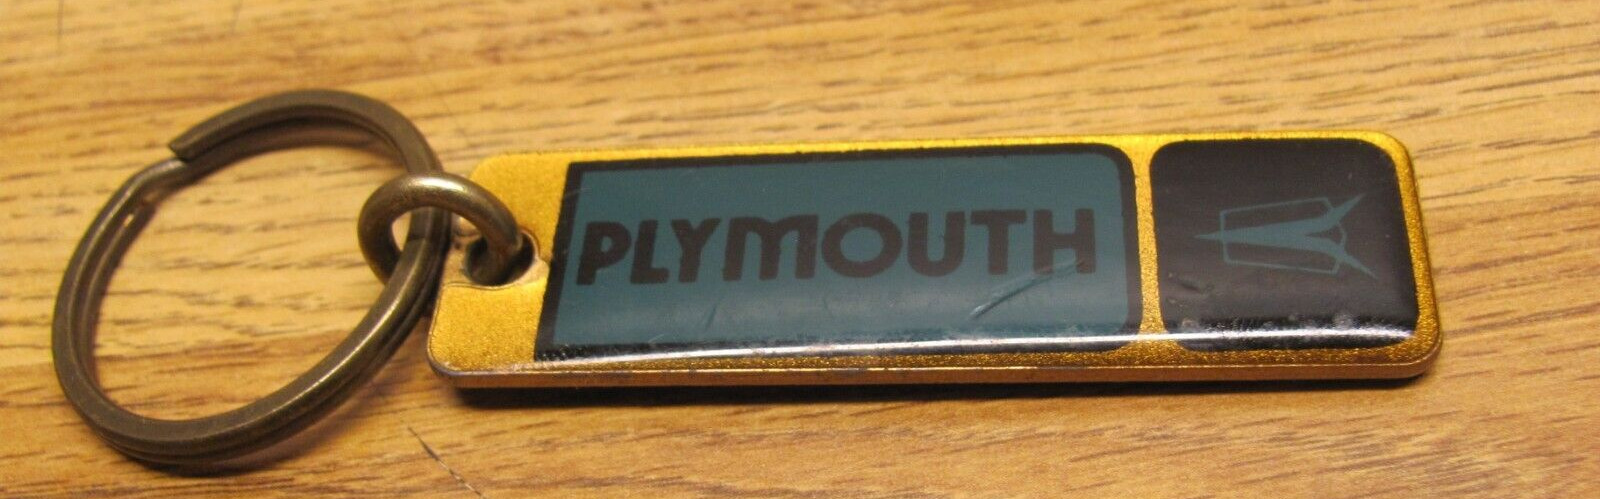 Vintage PLYMOUTH Key Ring Key Chain Key Carrier